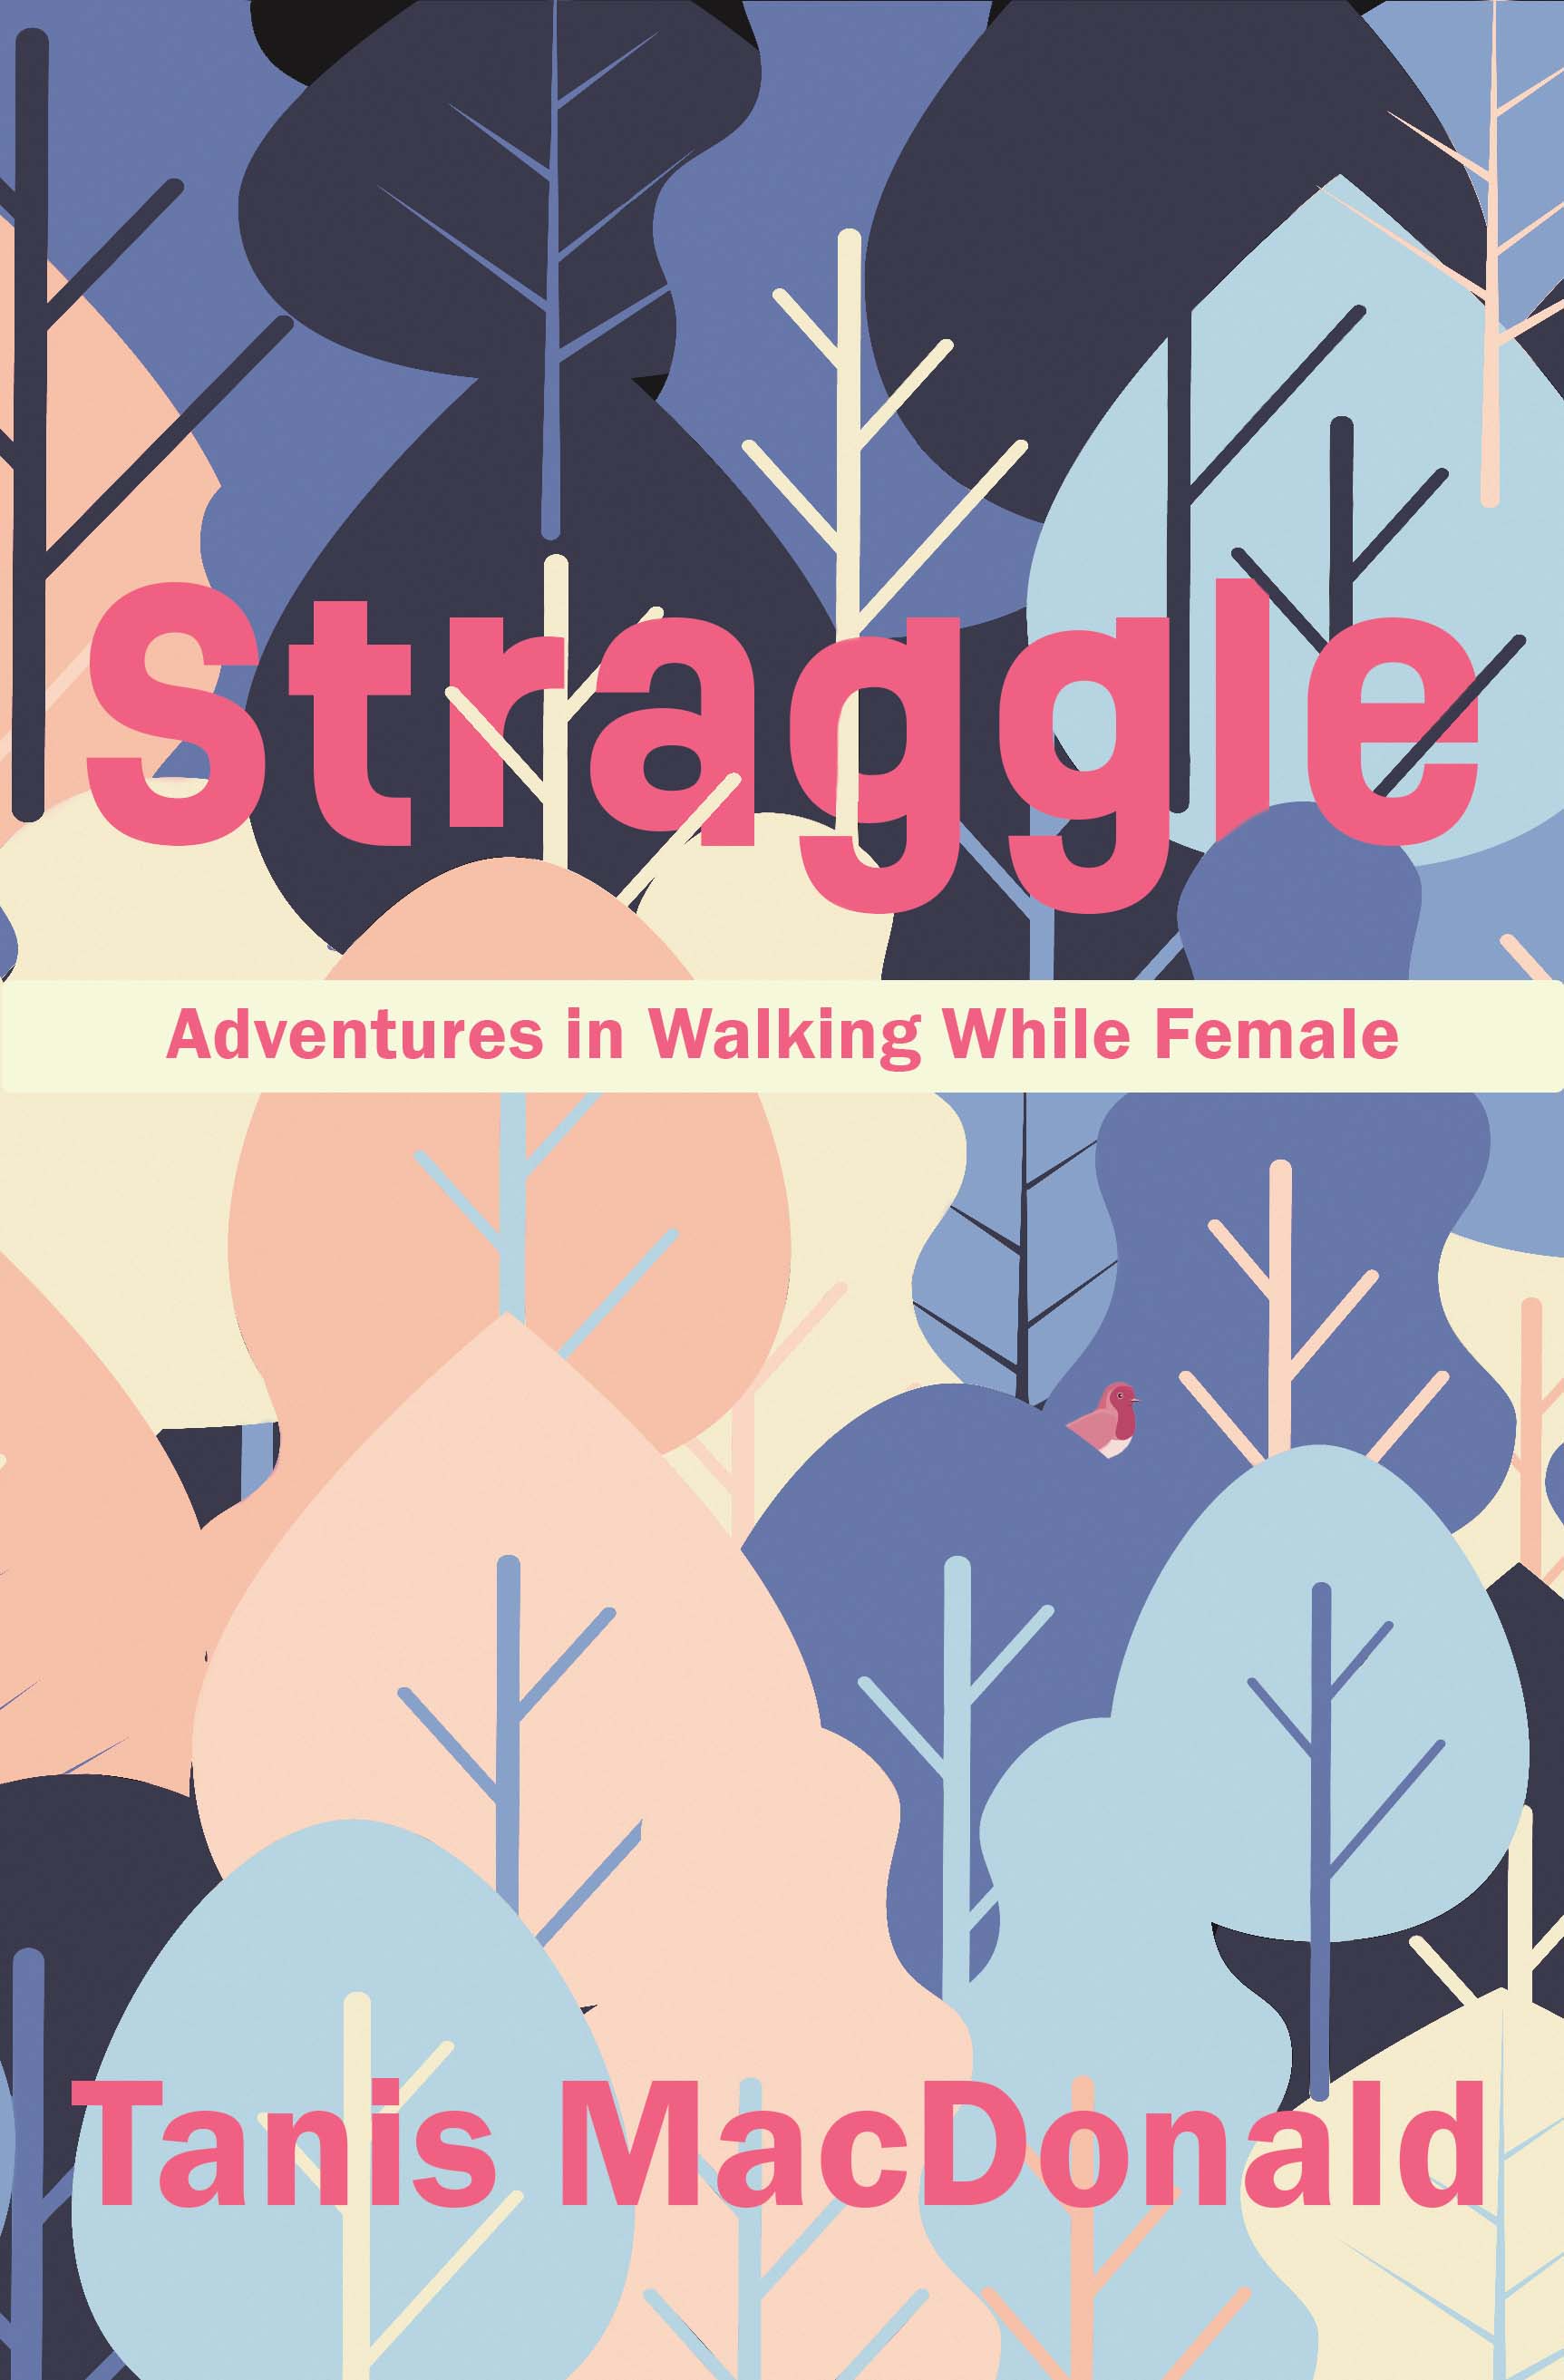 Book cover with images of trees in blue, purple, and grey, with a small red bird in one of them. Title in pink: Straggle: Adventures in Walking While Female. Author's name in pink: Tanis MacDonald.